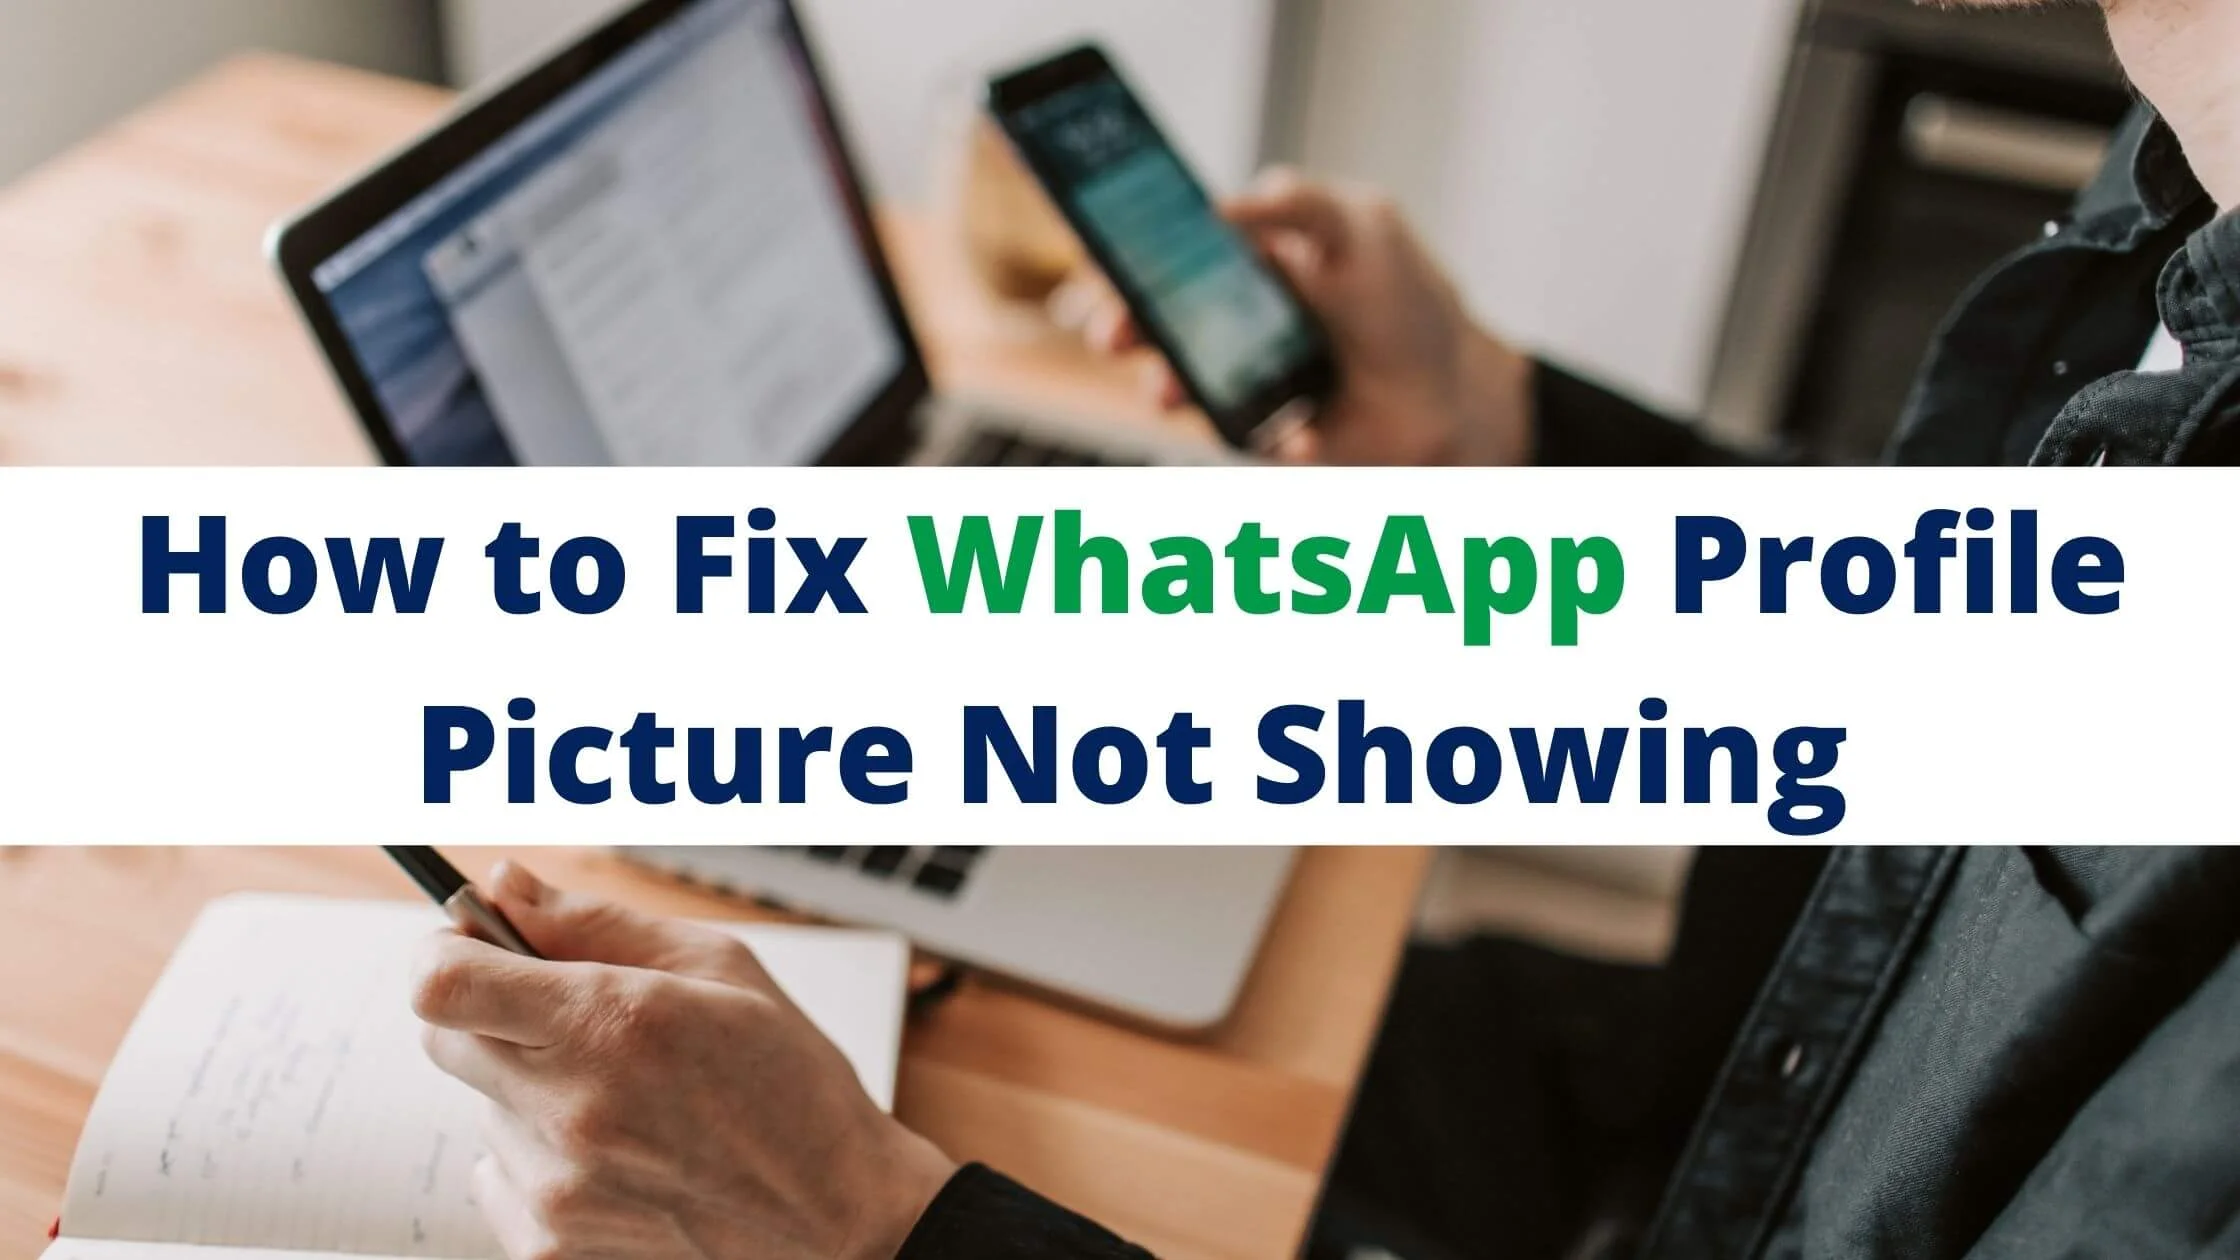 WhatsApp Profile Picture Not Showing